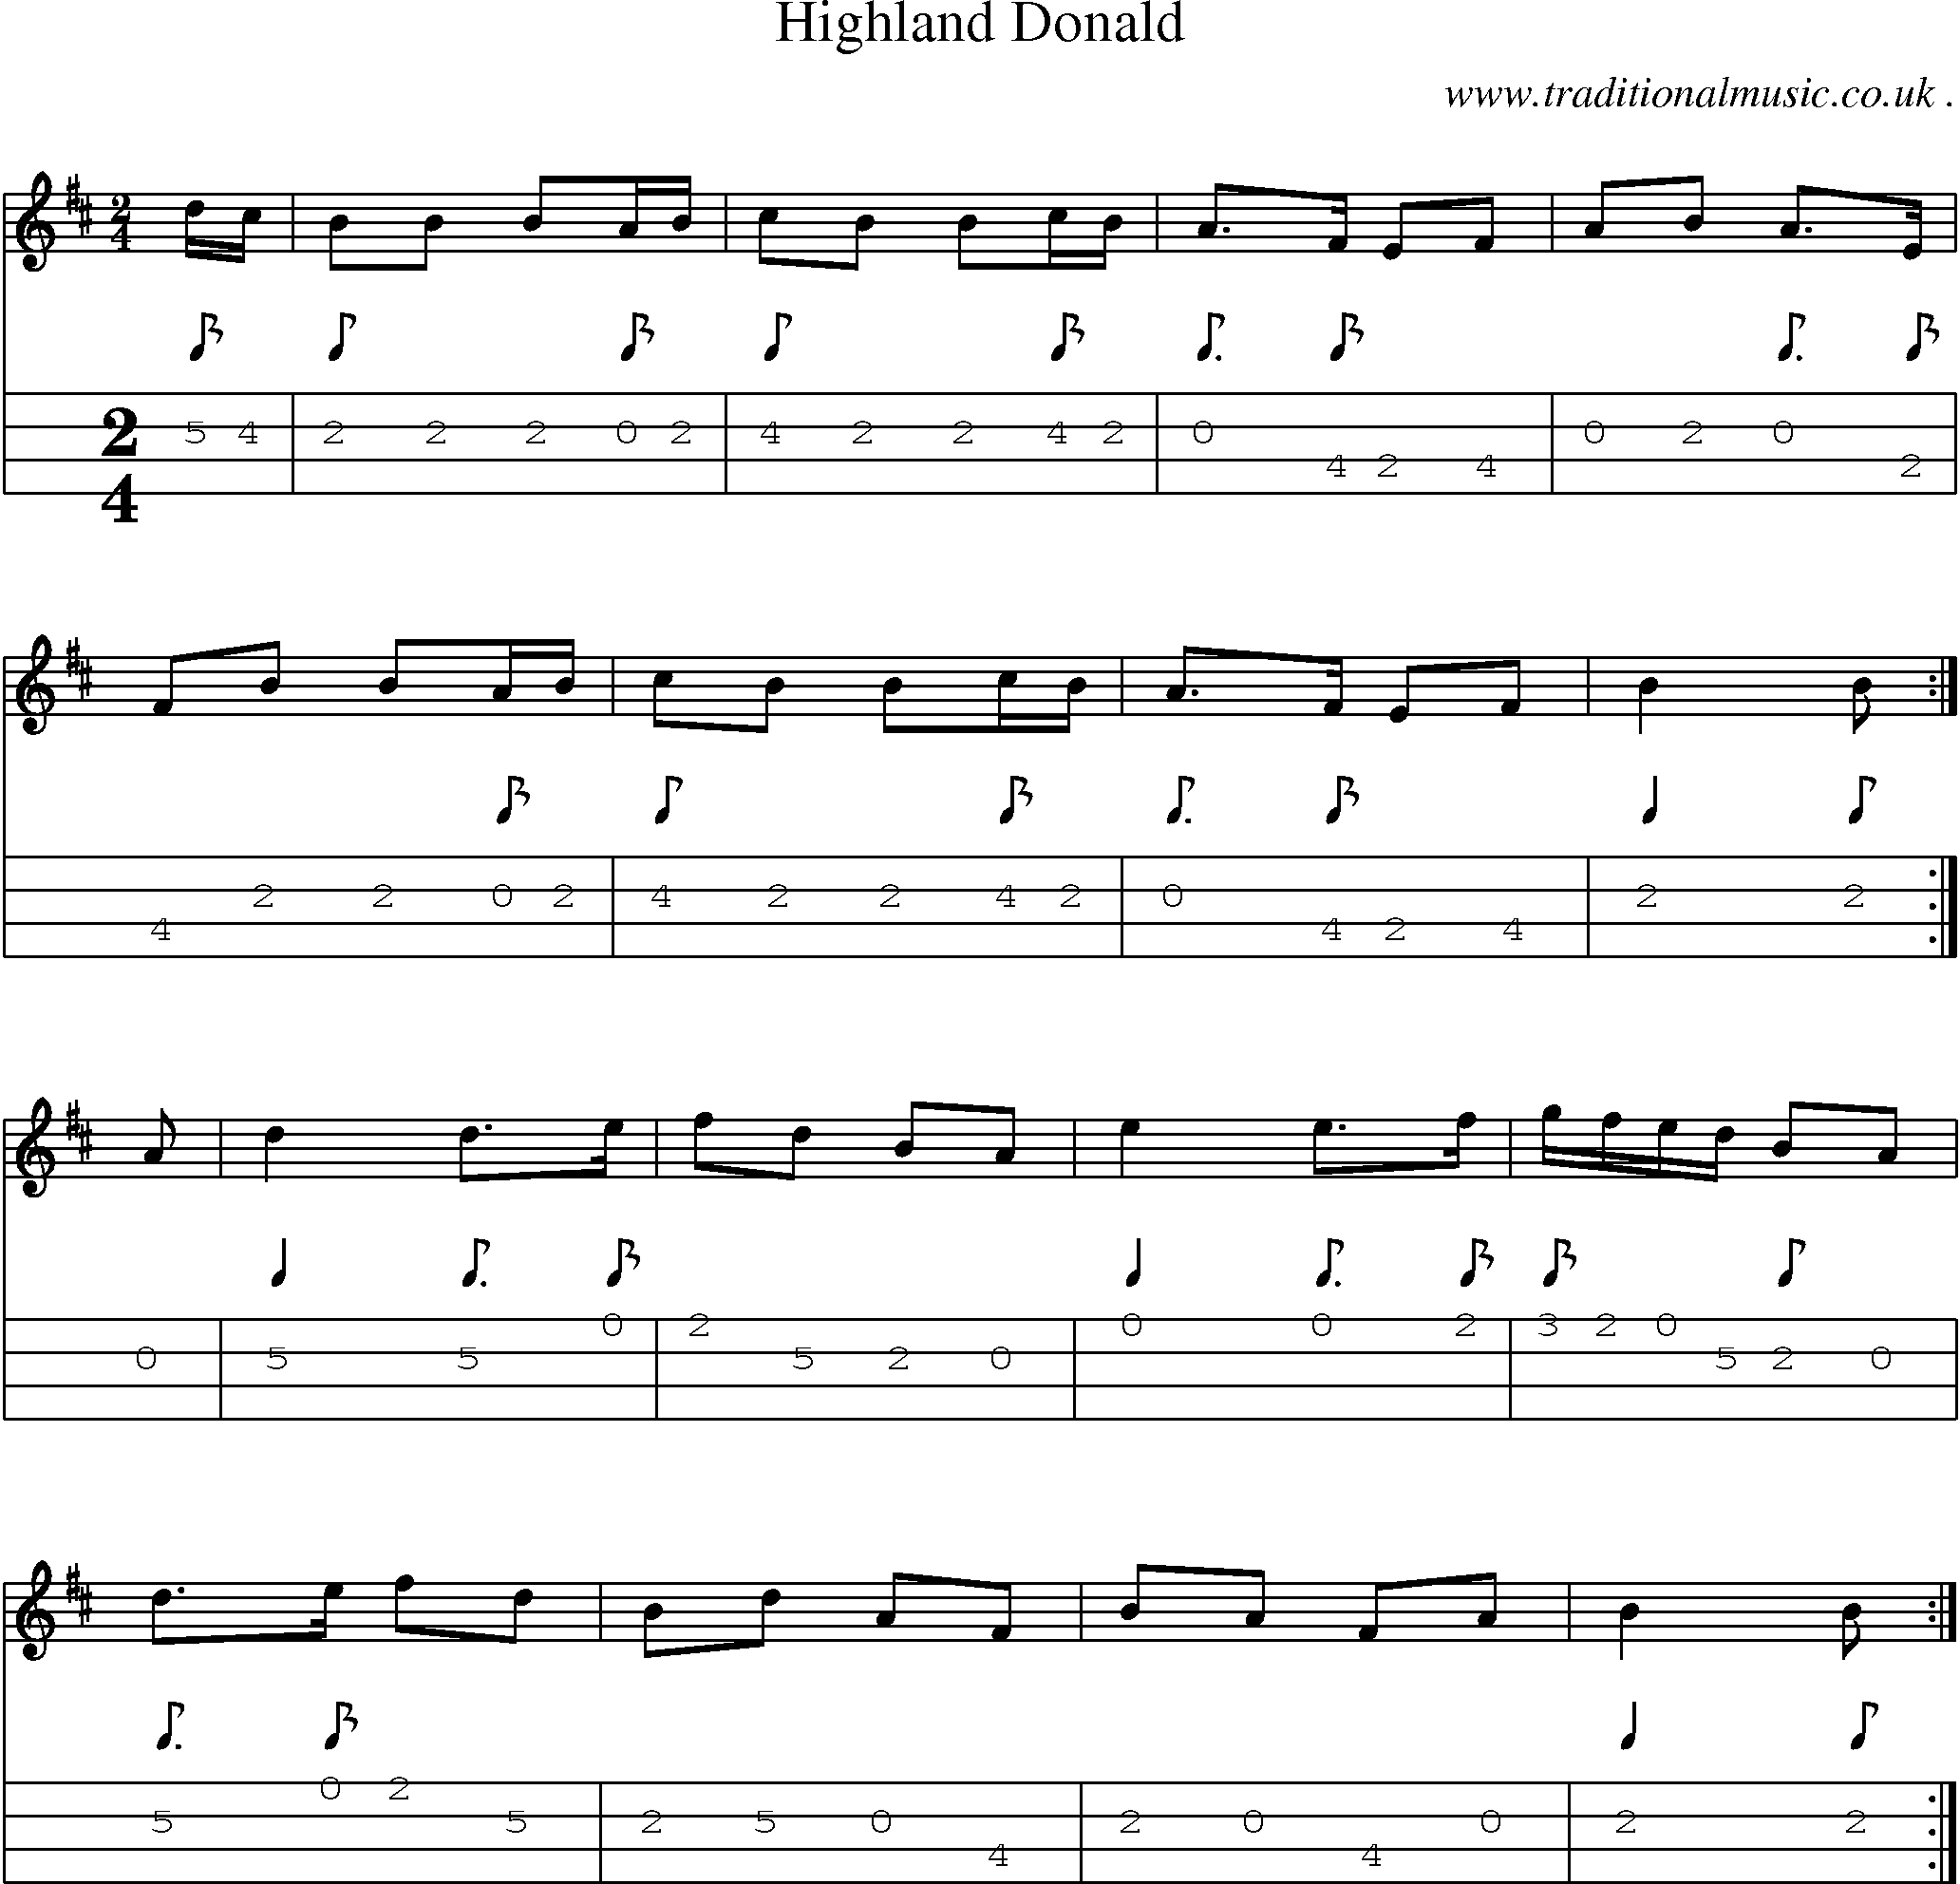 Sheet-music  score, Chords and Mandolin Tabs for Highland Donald